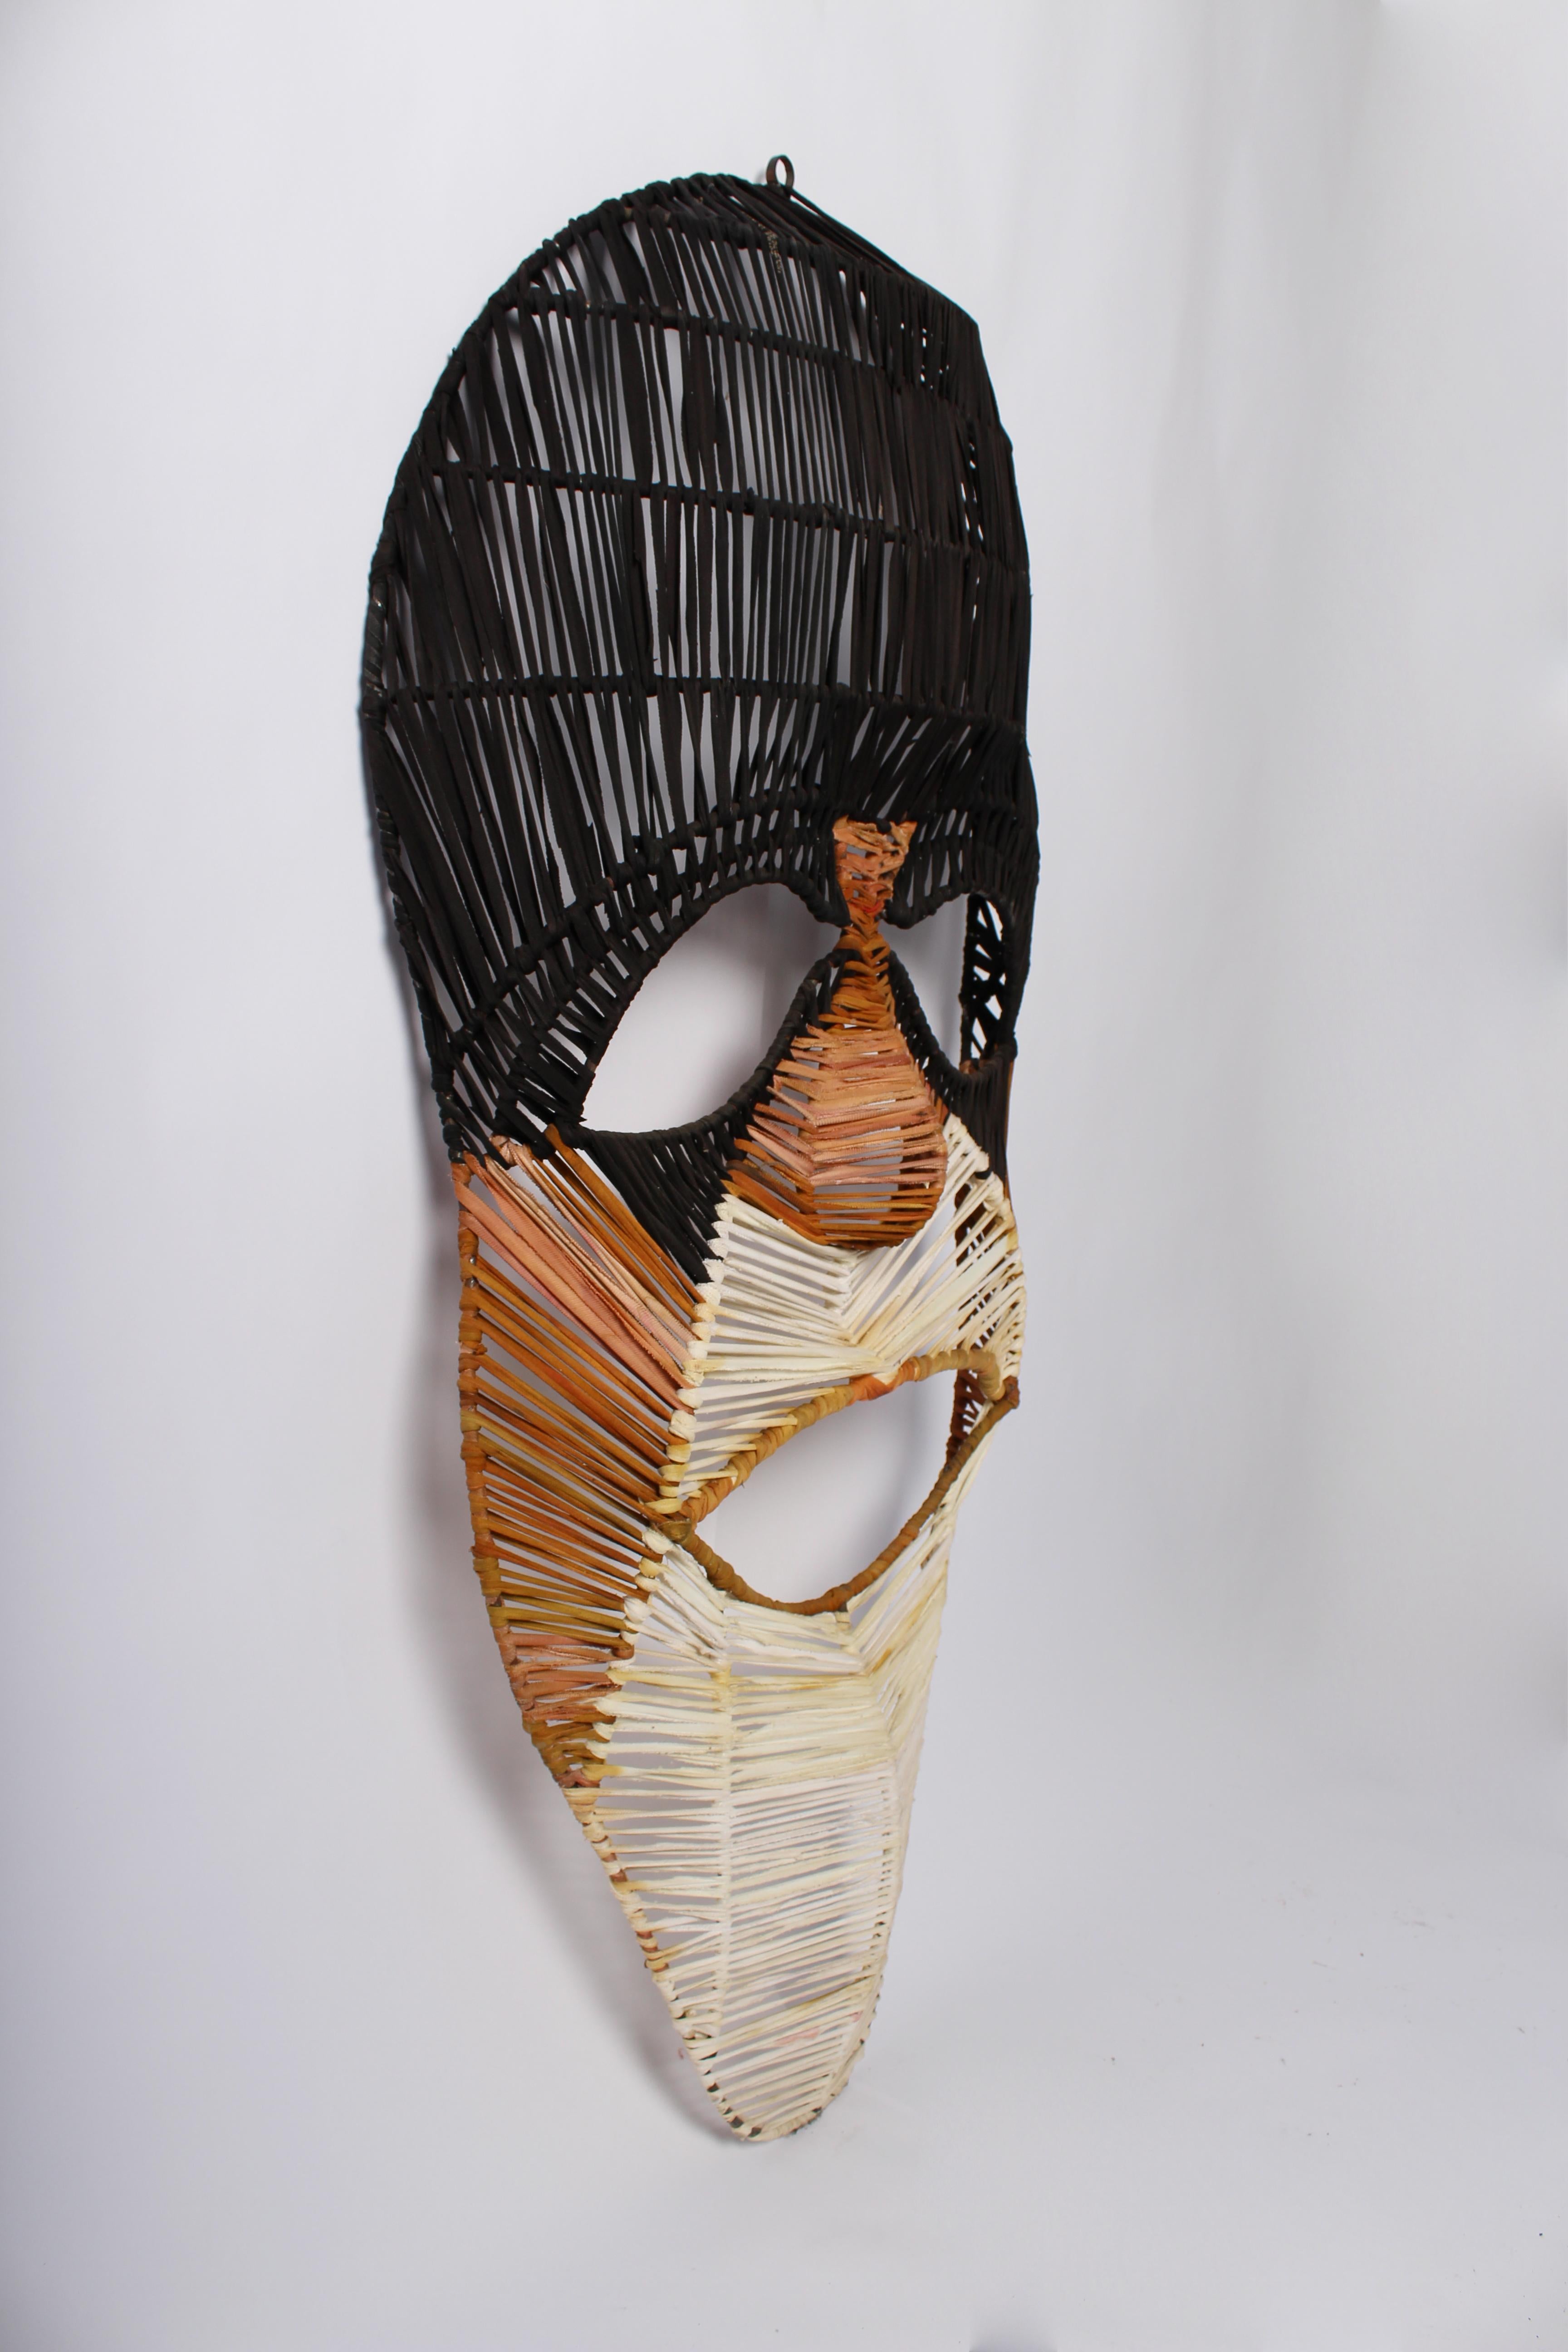 Telling my Story 1, Elisia Nghidishange, Mixed media sculpture For Sale 2